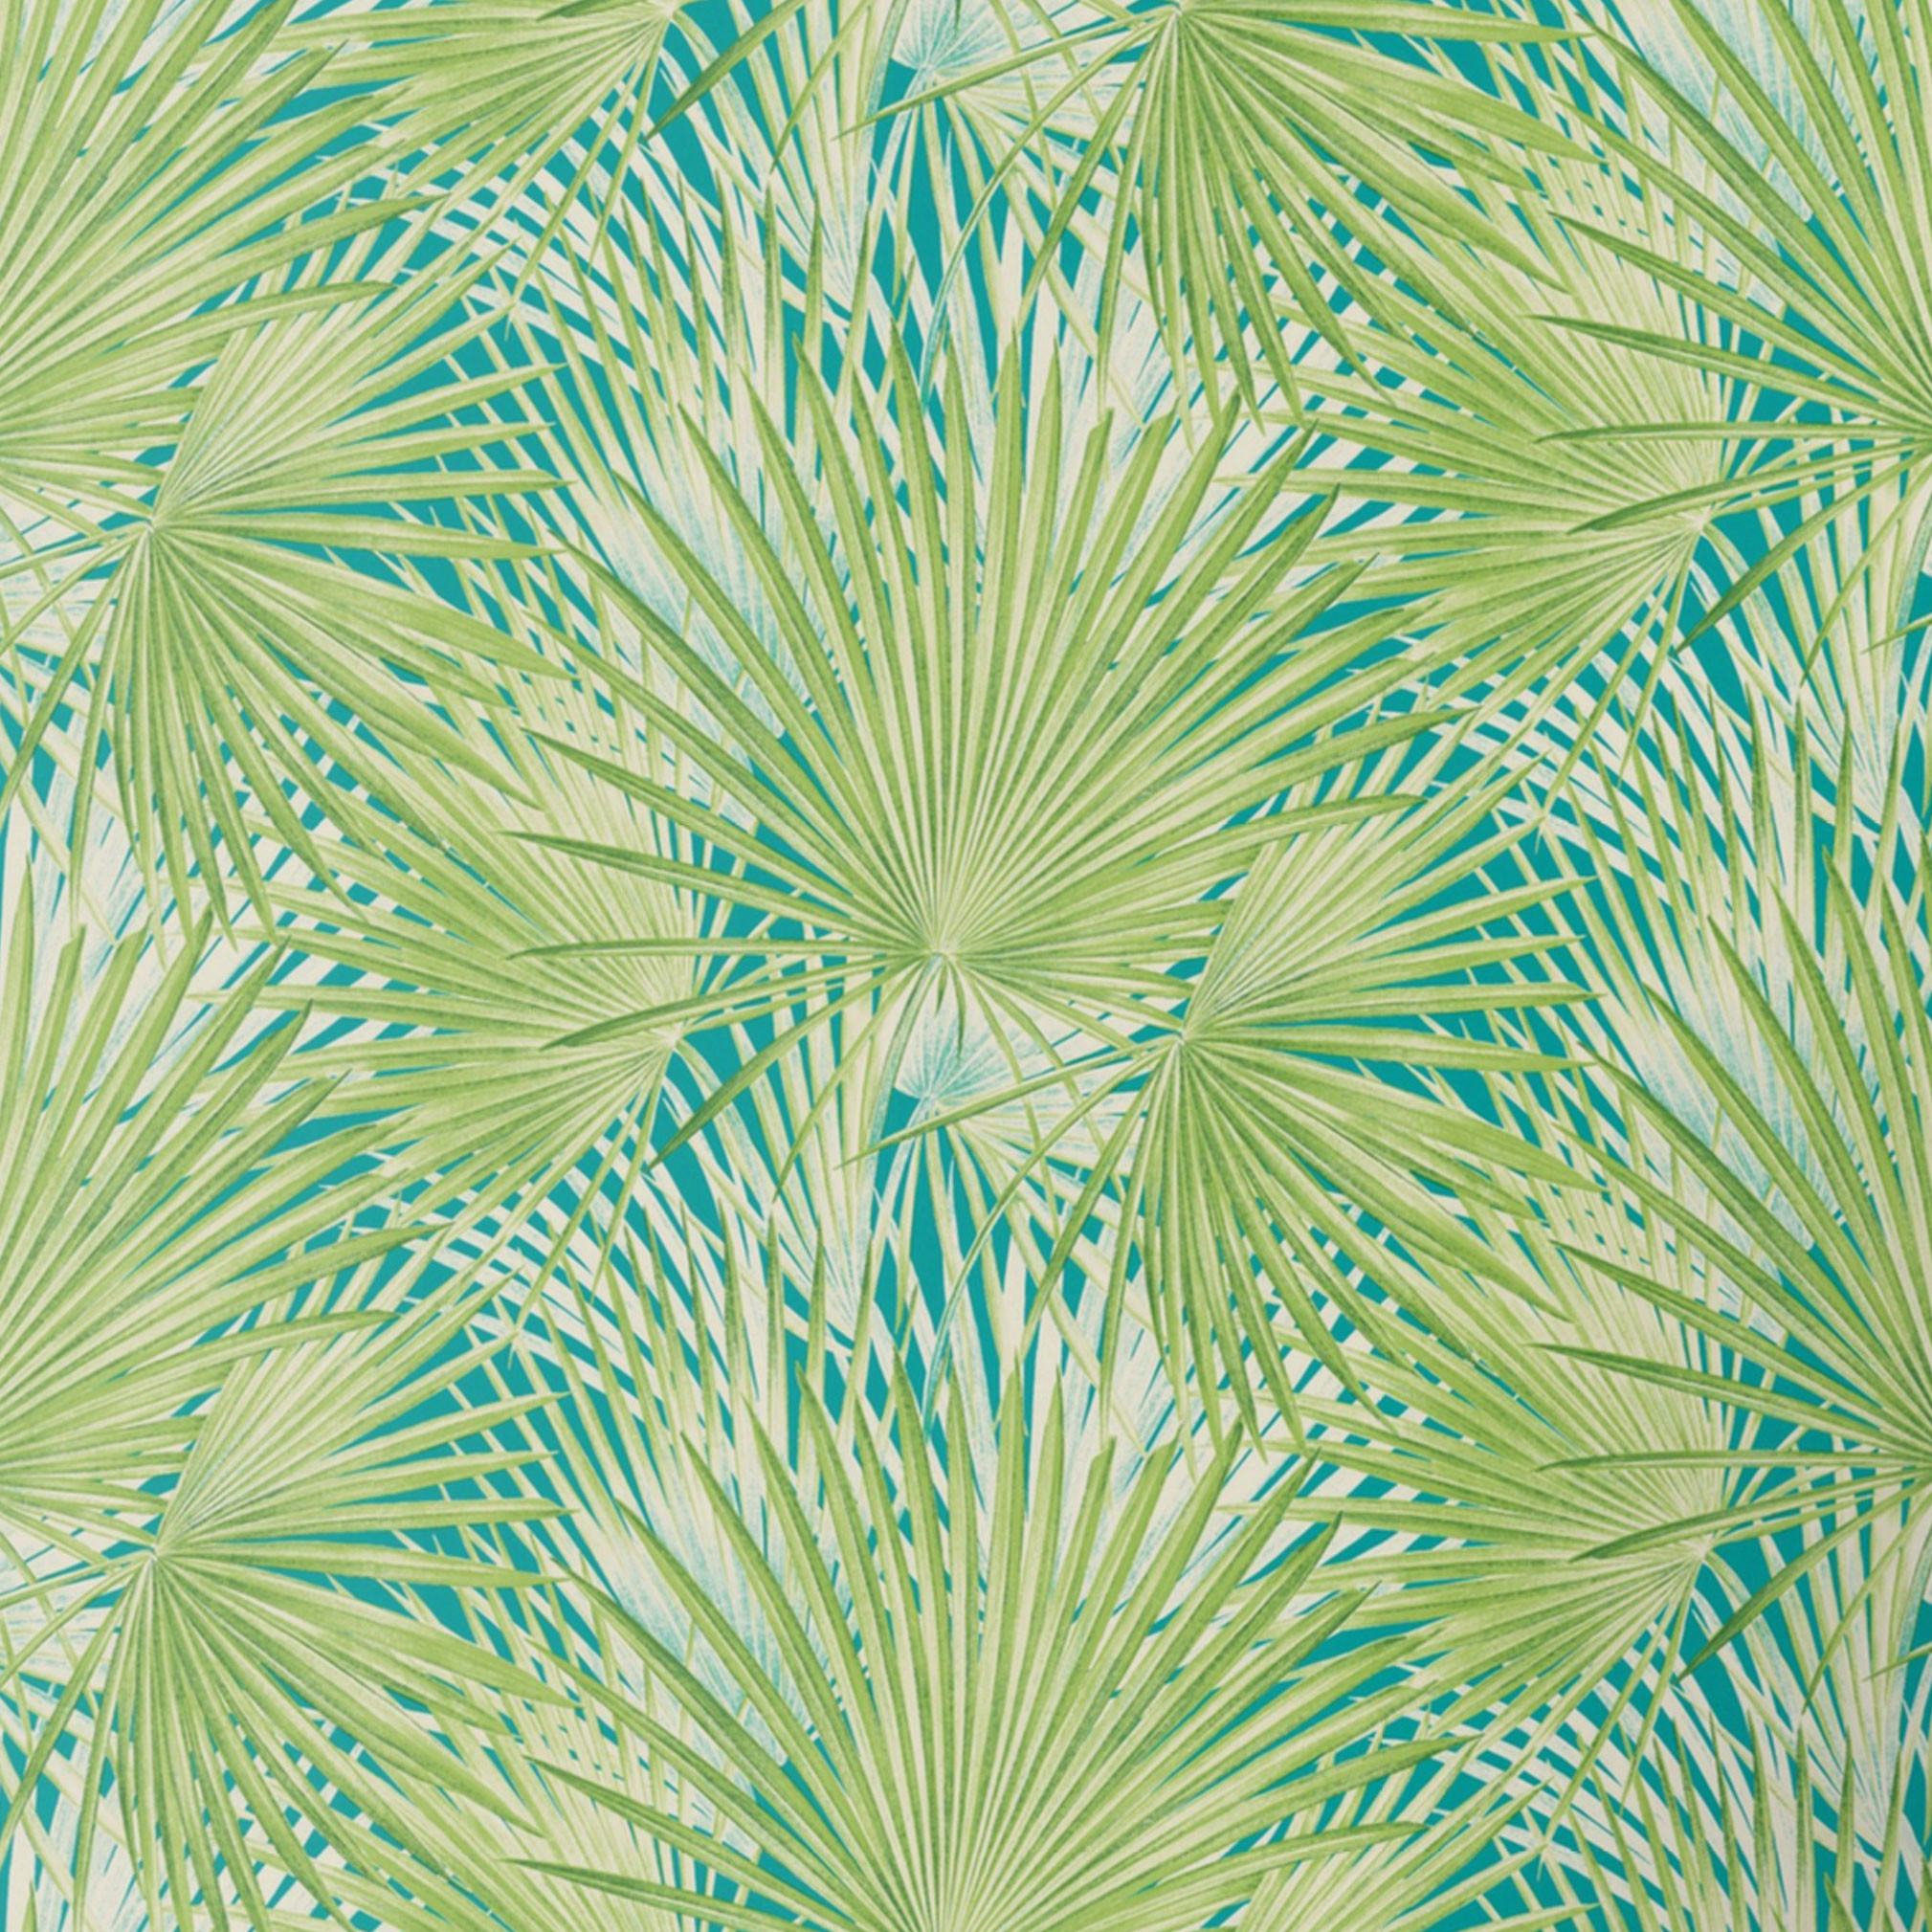 2019x2019 Tropical Palm Tree Wallpaper Exotic Print Smooth Vinyl Green & Teal Floral  Rasch